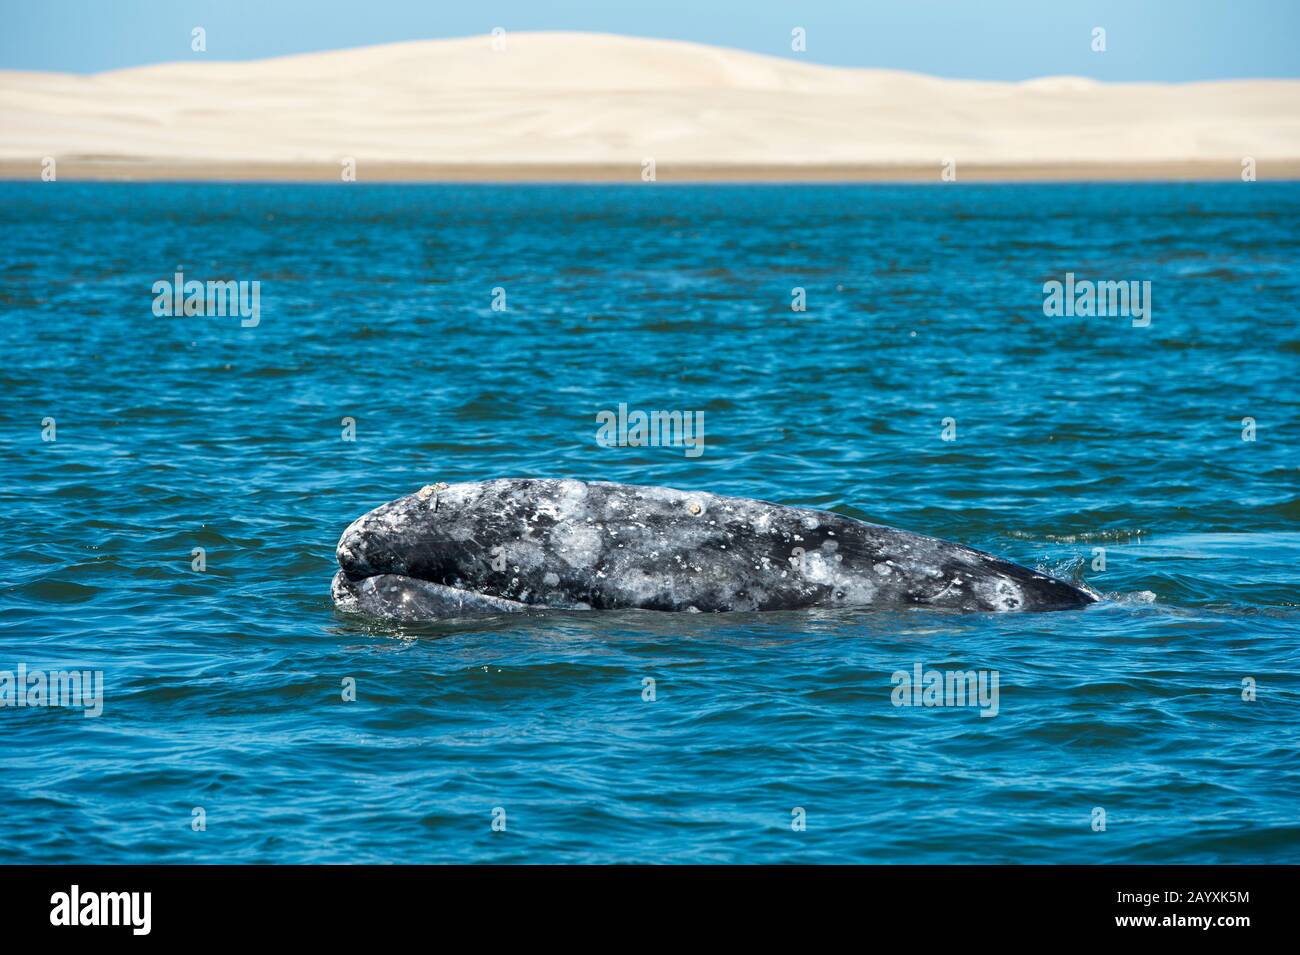 A Gray whale (Eschrichtius robustus) in Magdalena Bay, one of the breeding grounds where they give birth, near San Carlos in Baja California, Mexico. Stock Photo